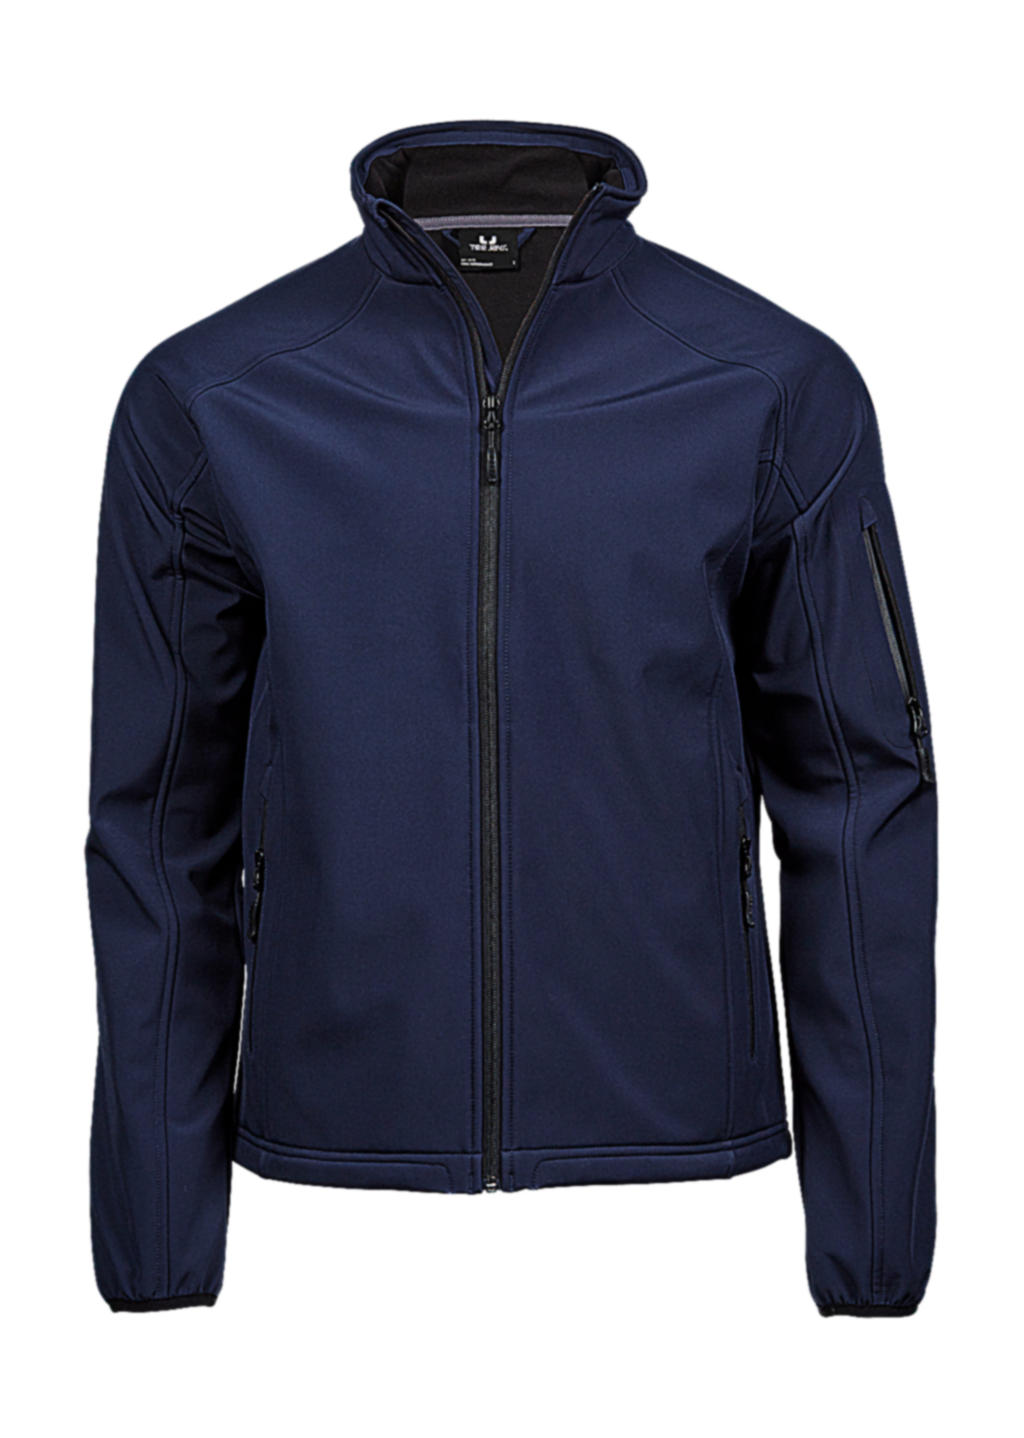  Lightweight Performance Softshell in Farbe Navy